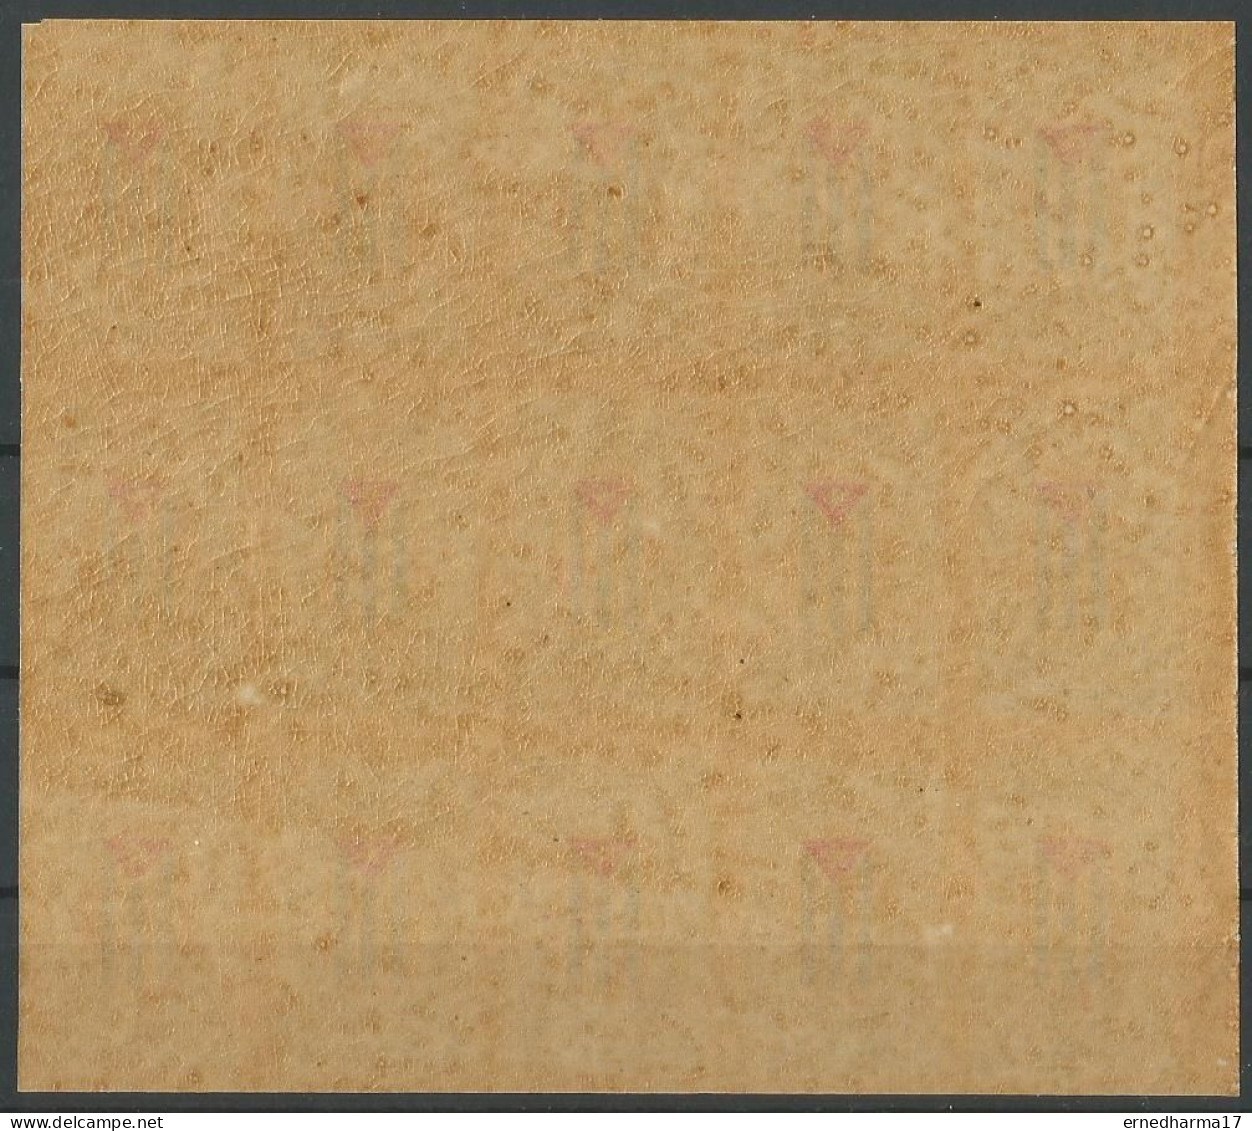 Cuba 1896. CUBA LIBRA. MNH BLOCK OF 15 IMPERFORATED STAMPS. CORREO MAMBÍ. REBEL STAMPS. ERROR. VERY SCARCE.